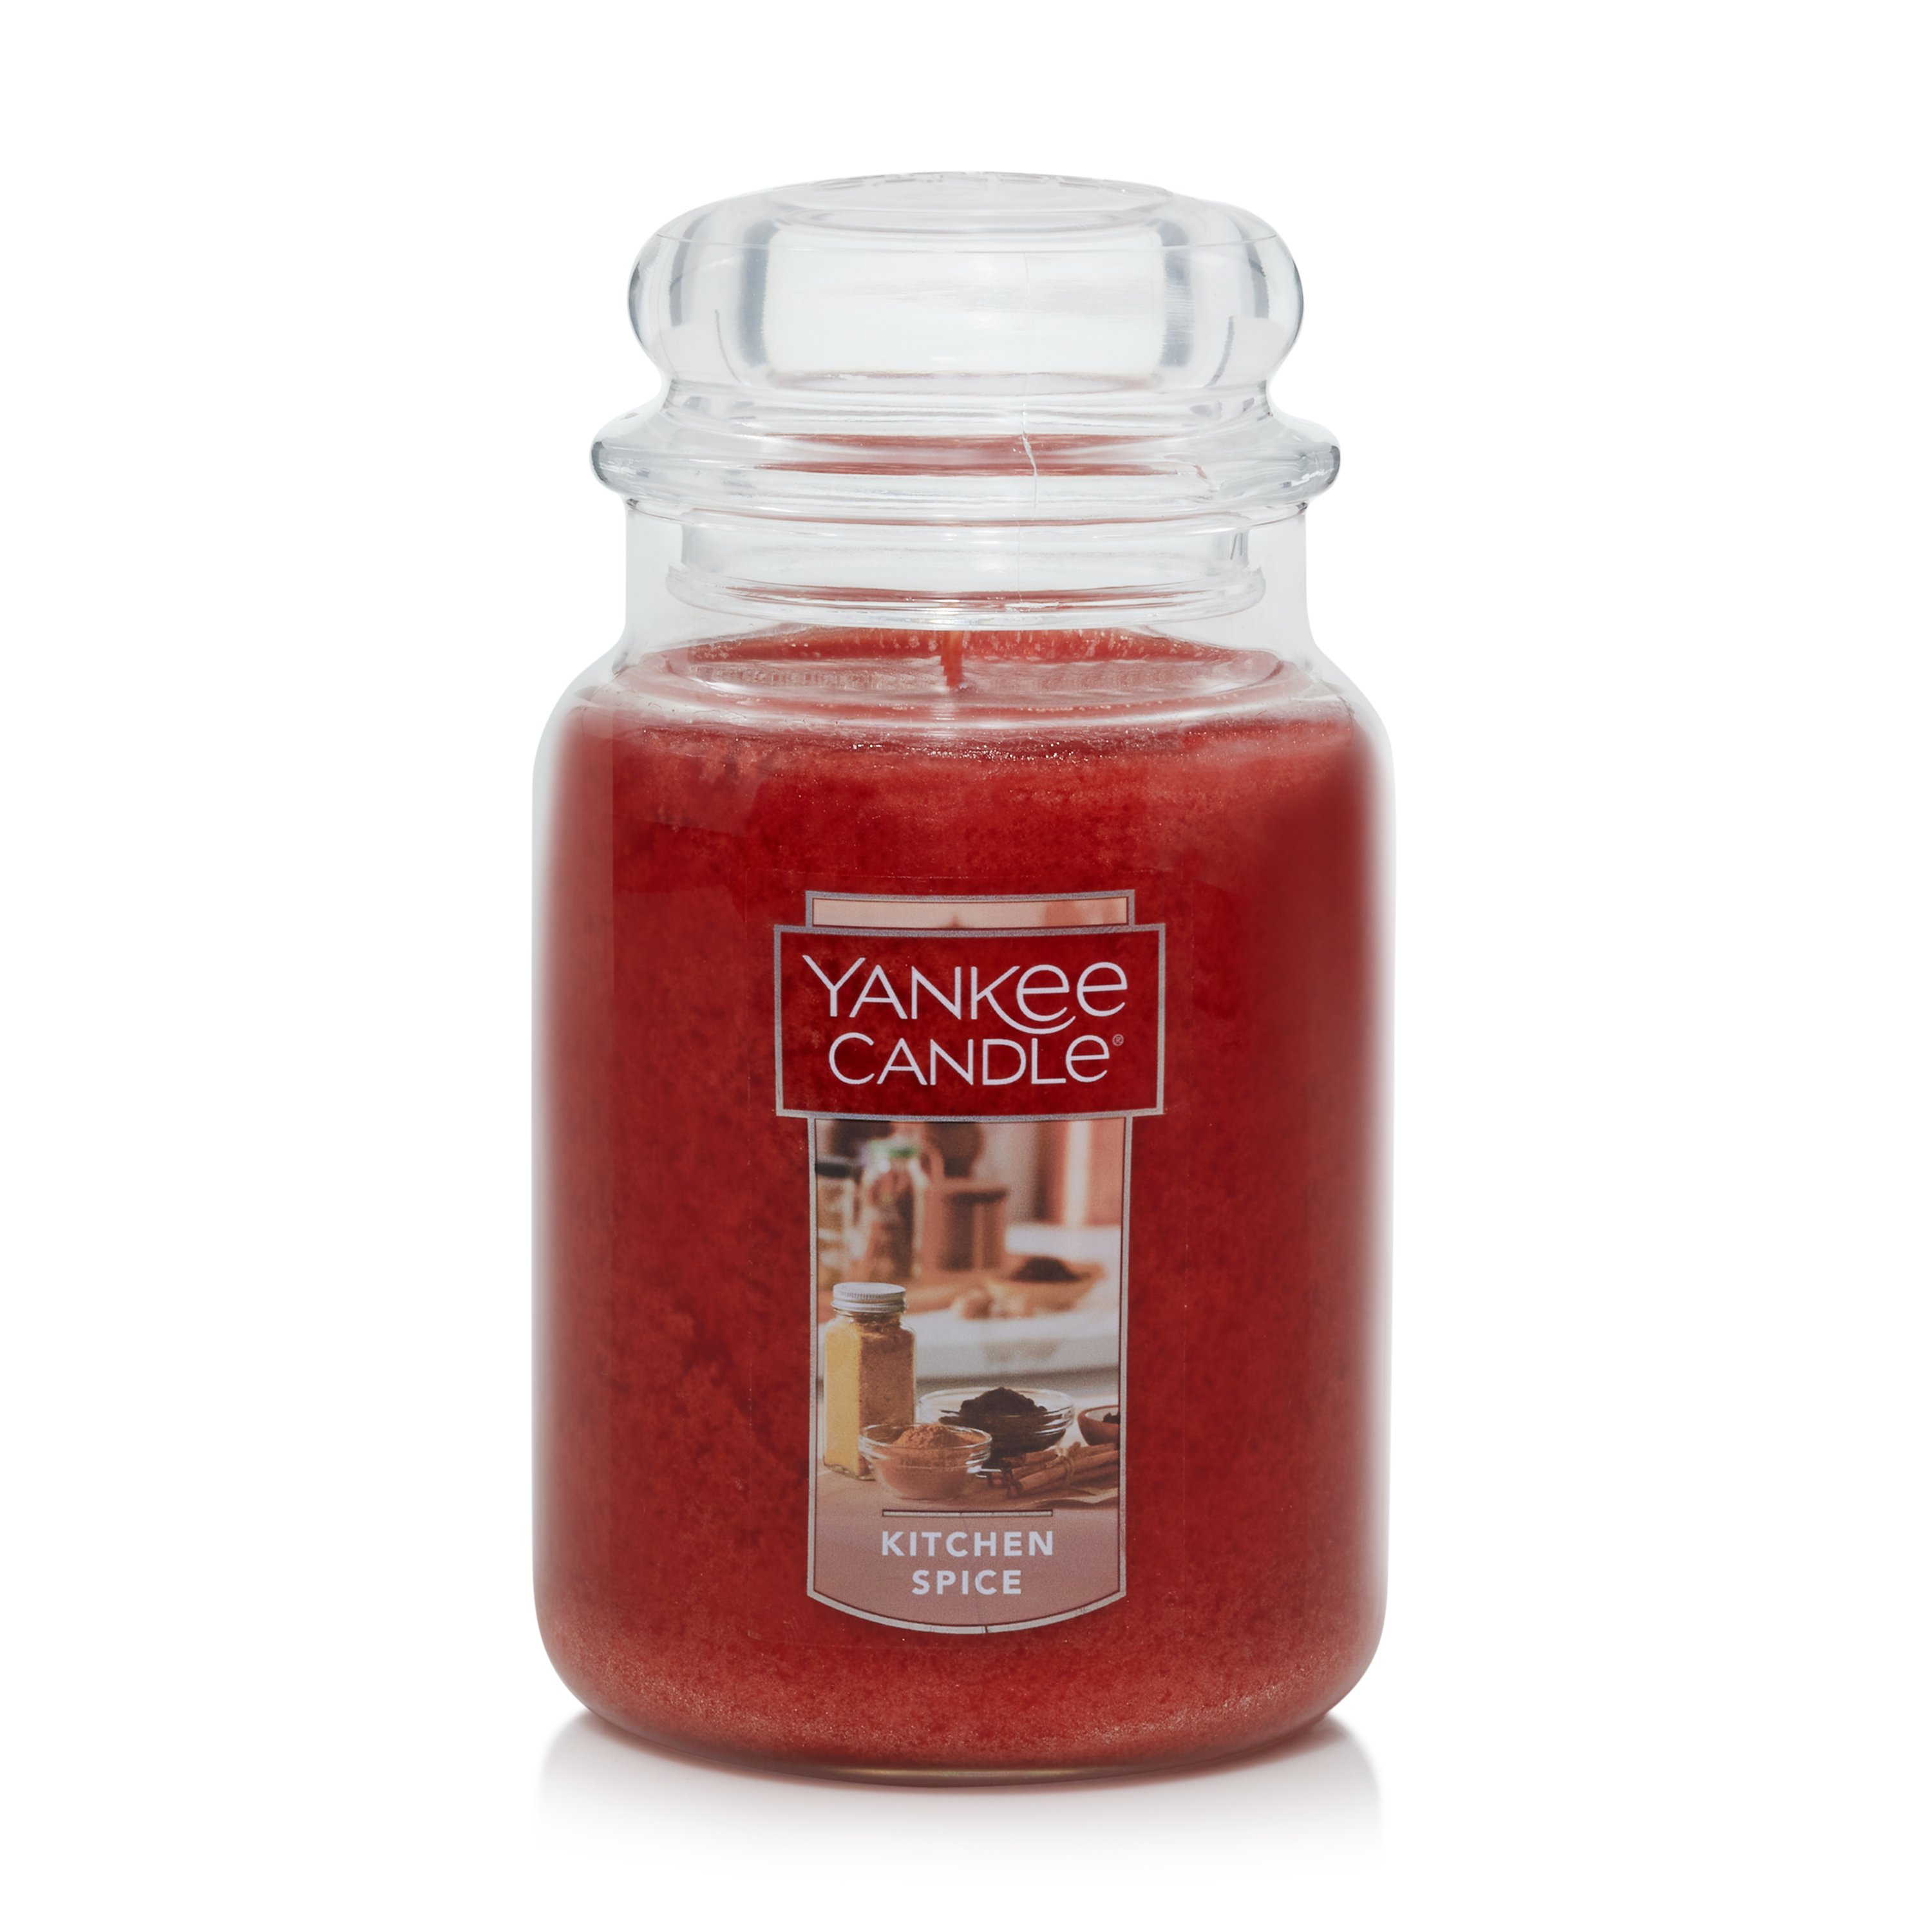 Yankee Candle Kitchen Spice - 22 oz Original Large Jar Scented Candle 